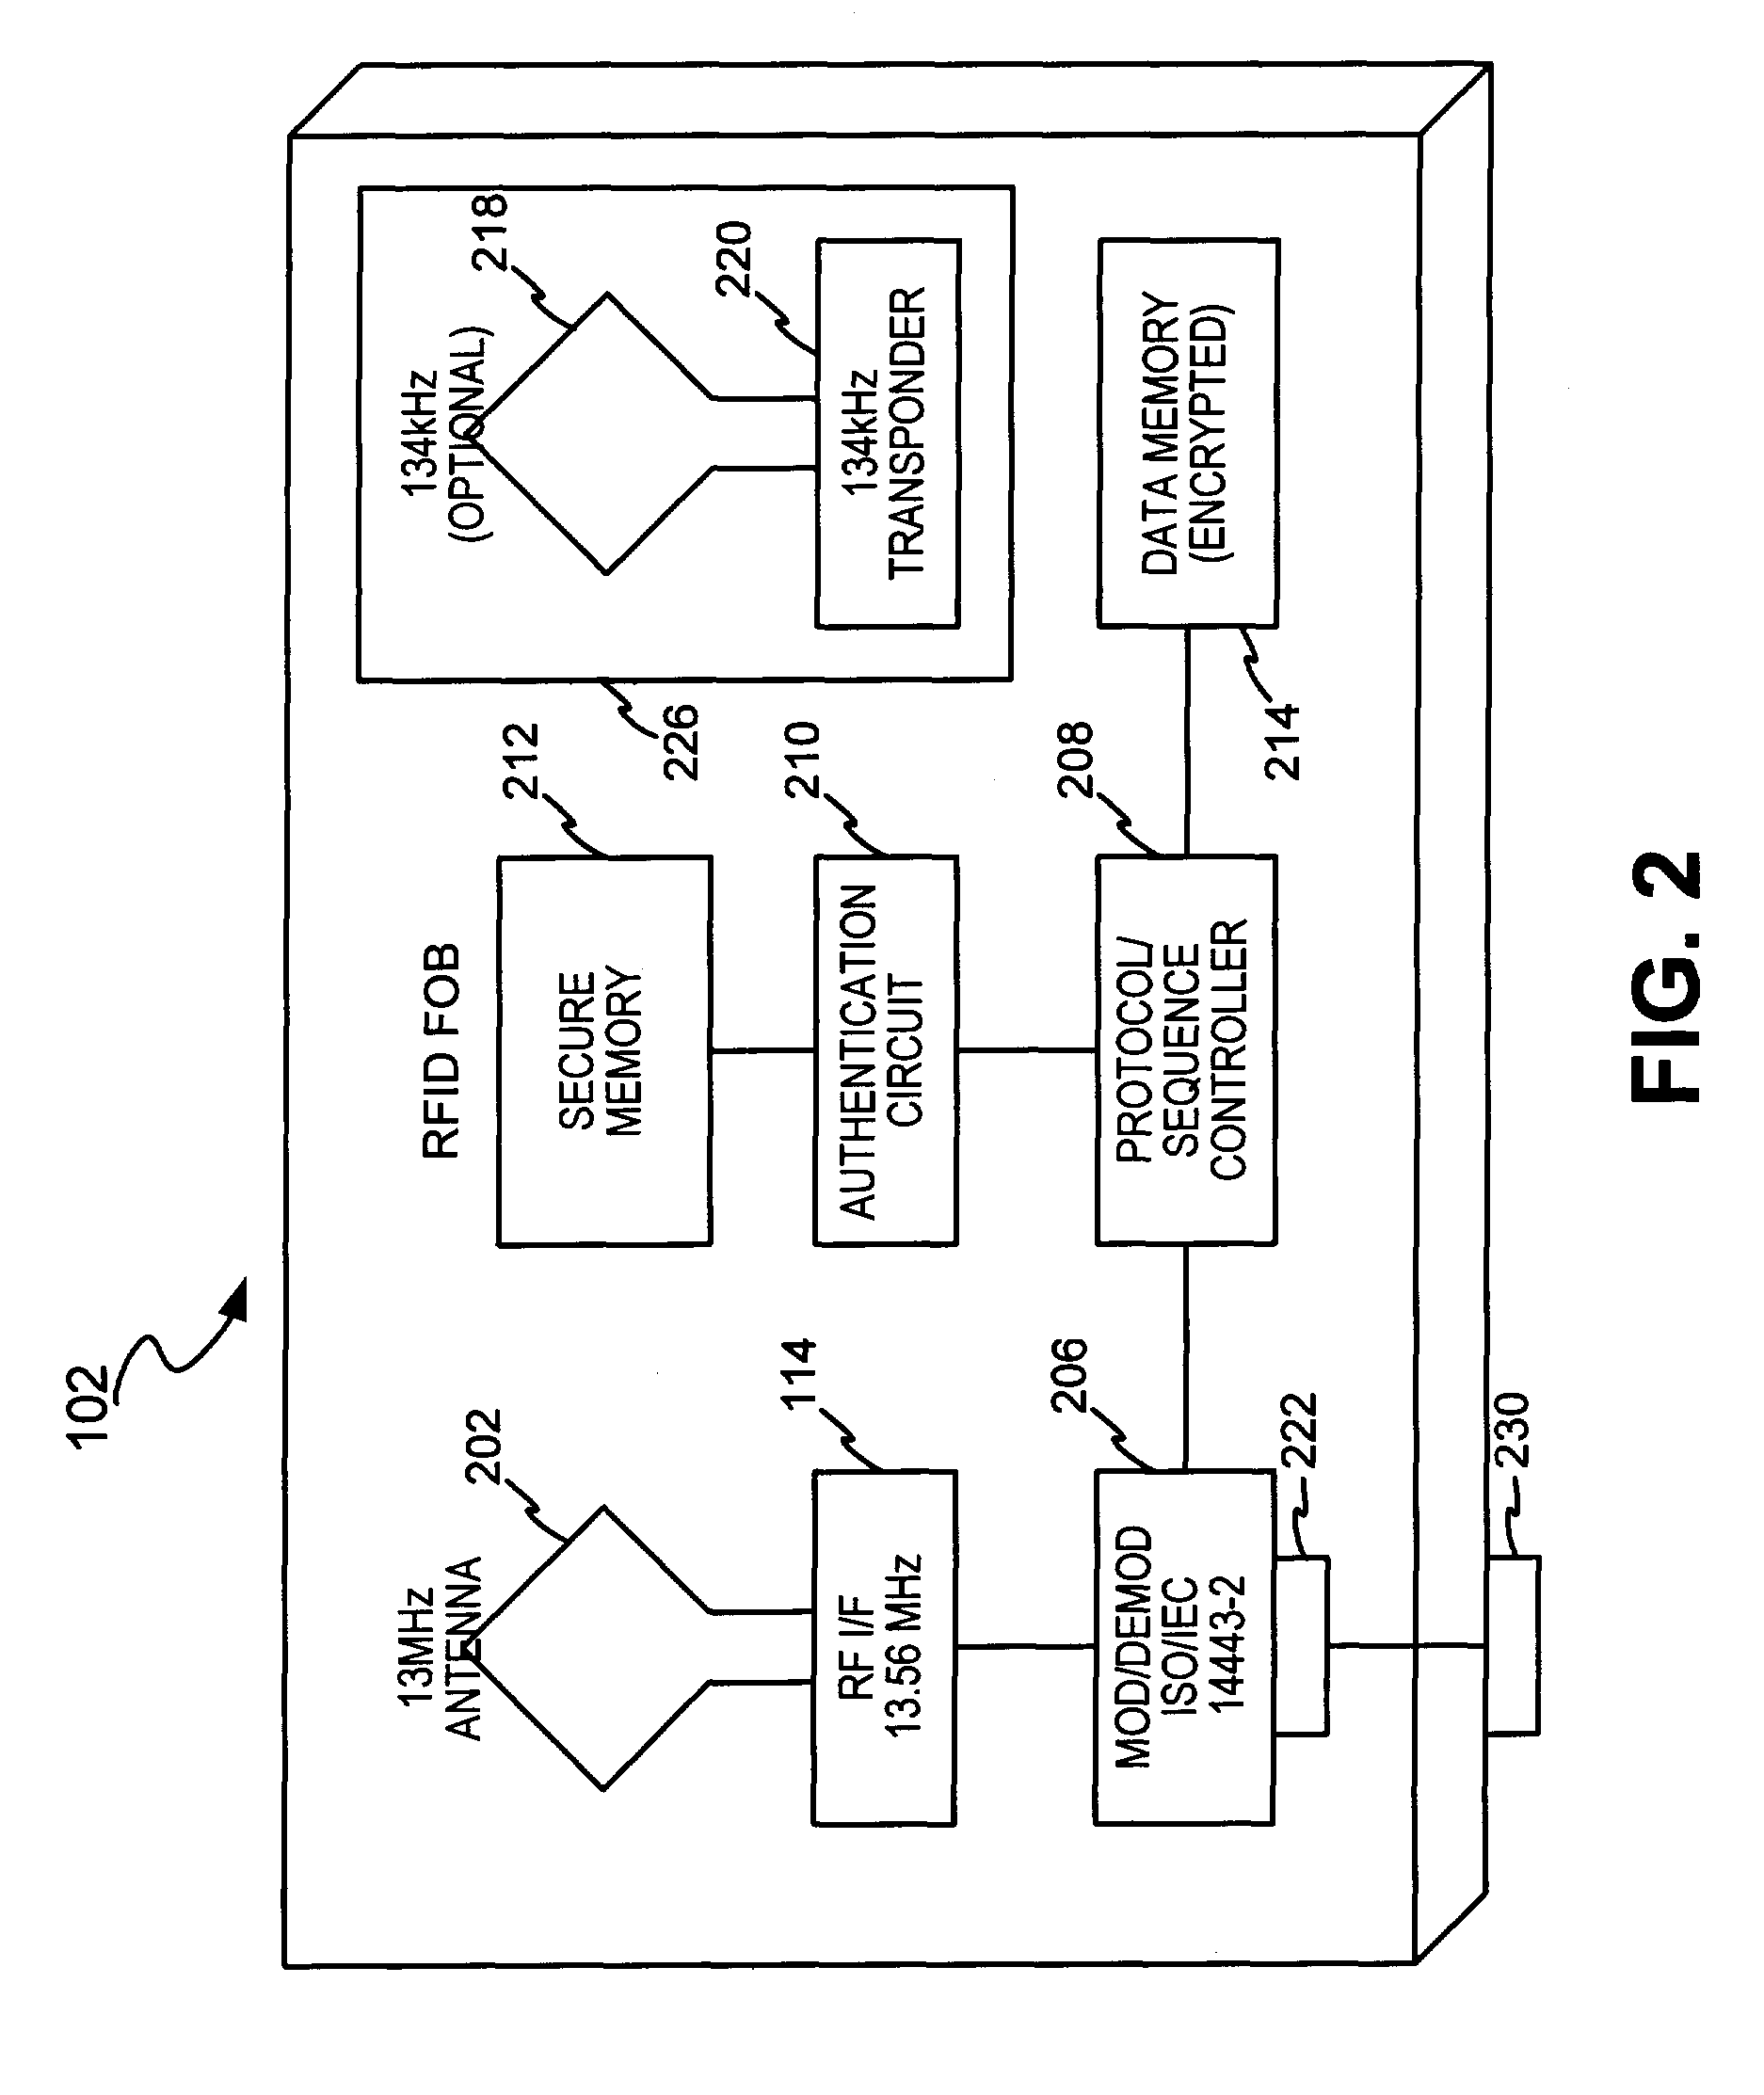 System and method for dynamic fob synchronization and personalization